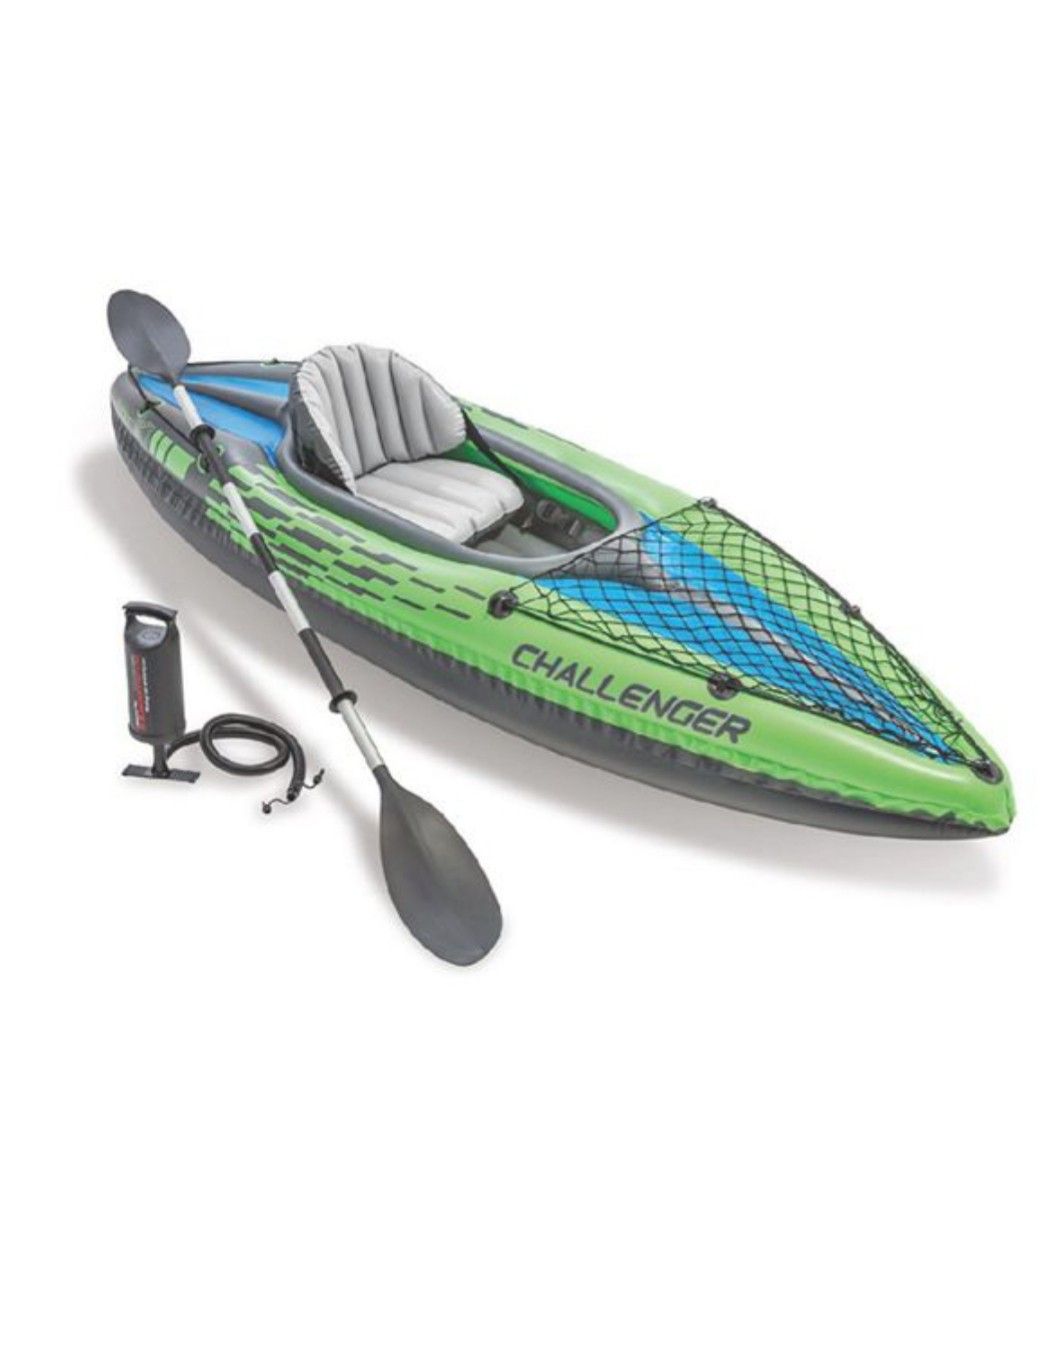 Intex Challenger K1 Kayak, 1-Person Inflatable Kayak Set with Aluminum Oars and High Output Air Pump, with adult general purpose boating vest